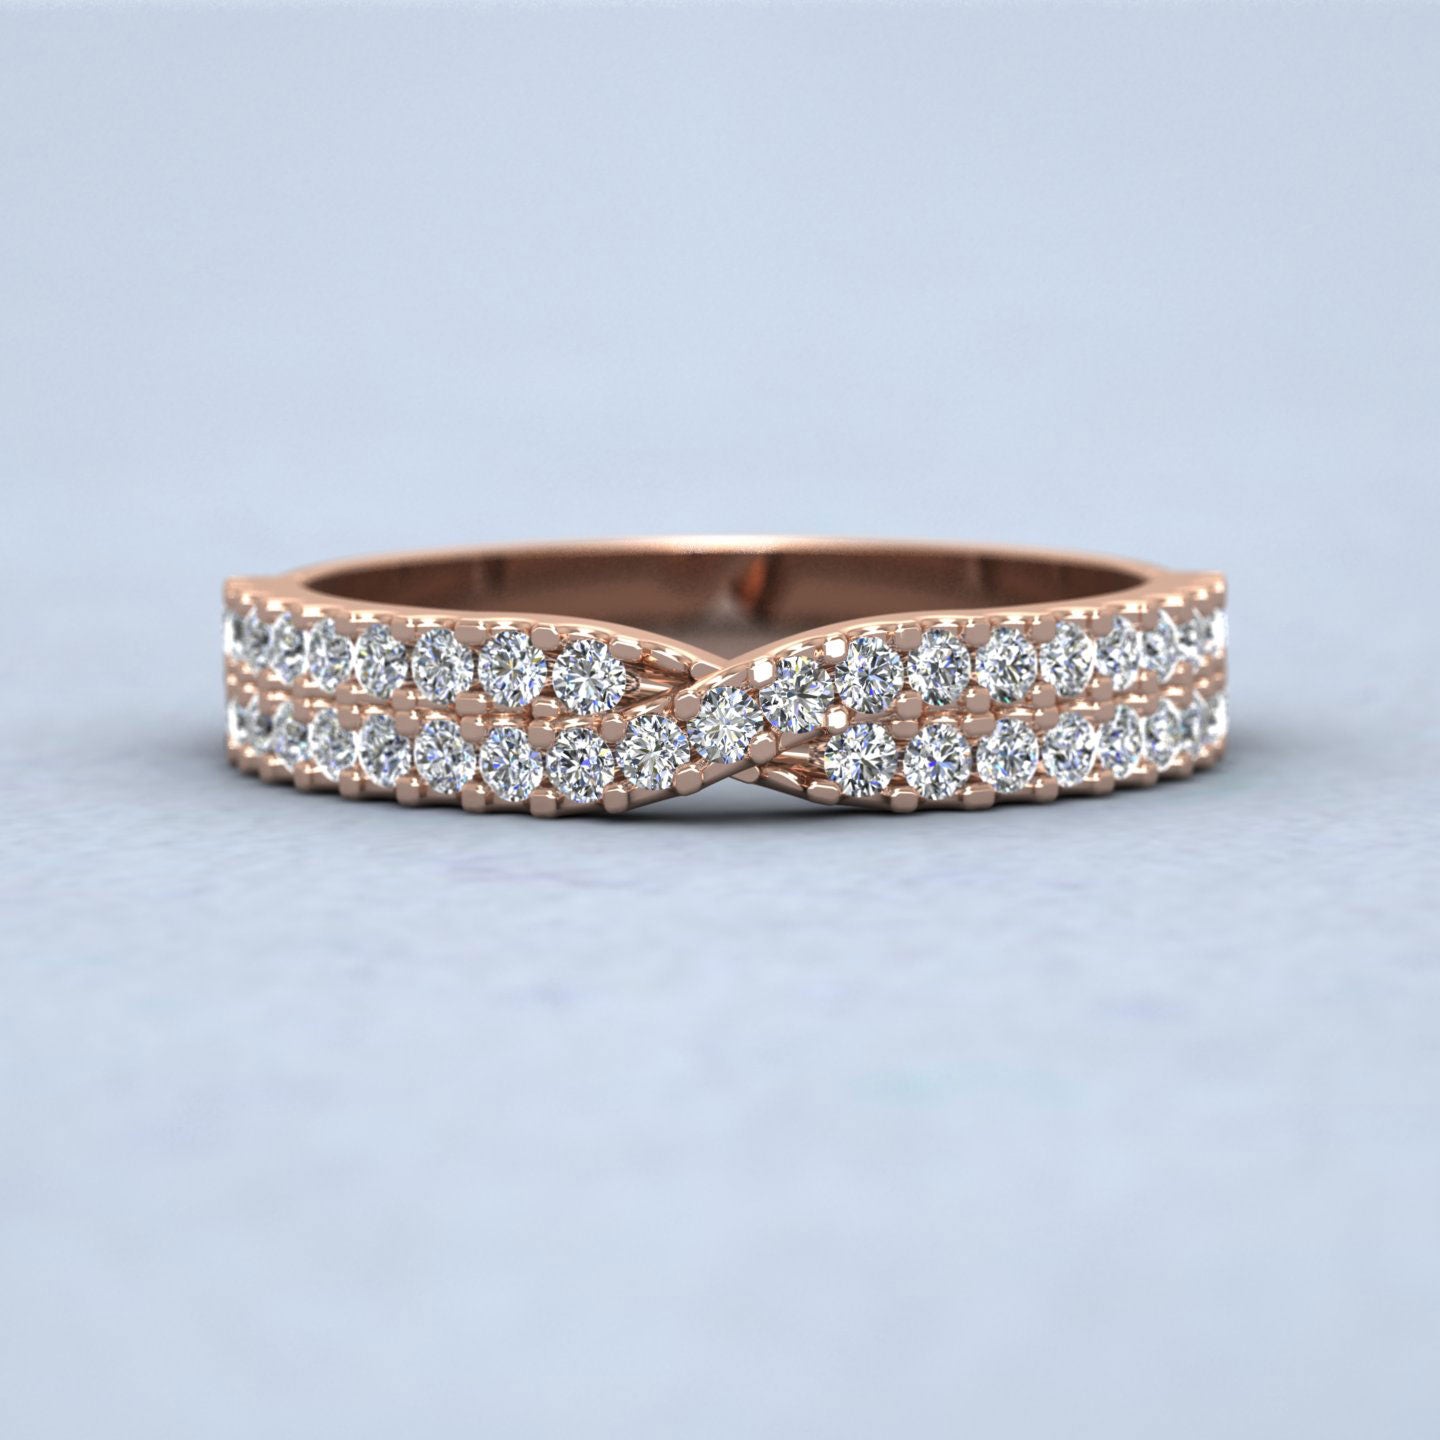 Crossover Diamond Claw Set Wedding Ring In 18ct Rose Gold 3.5mm Wide